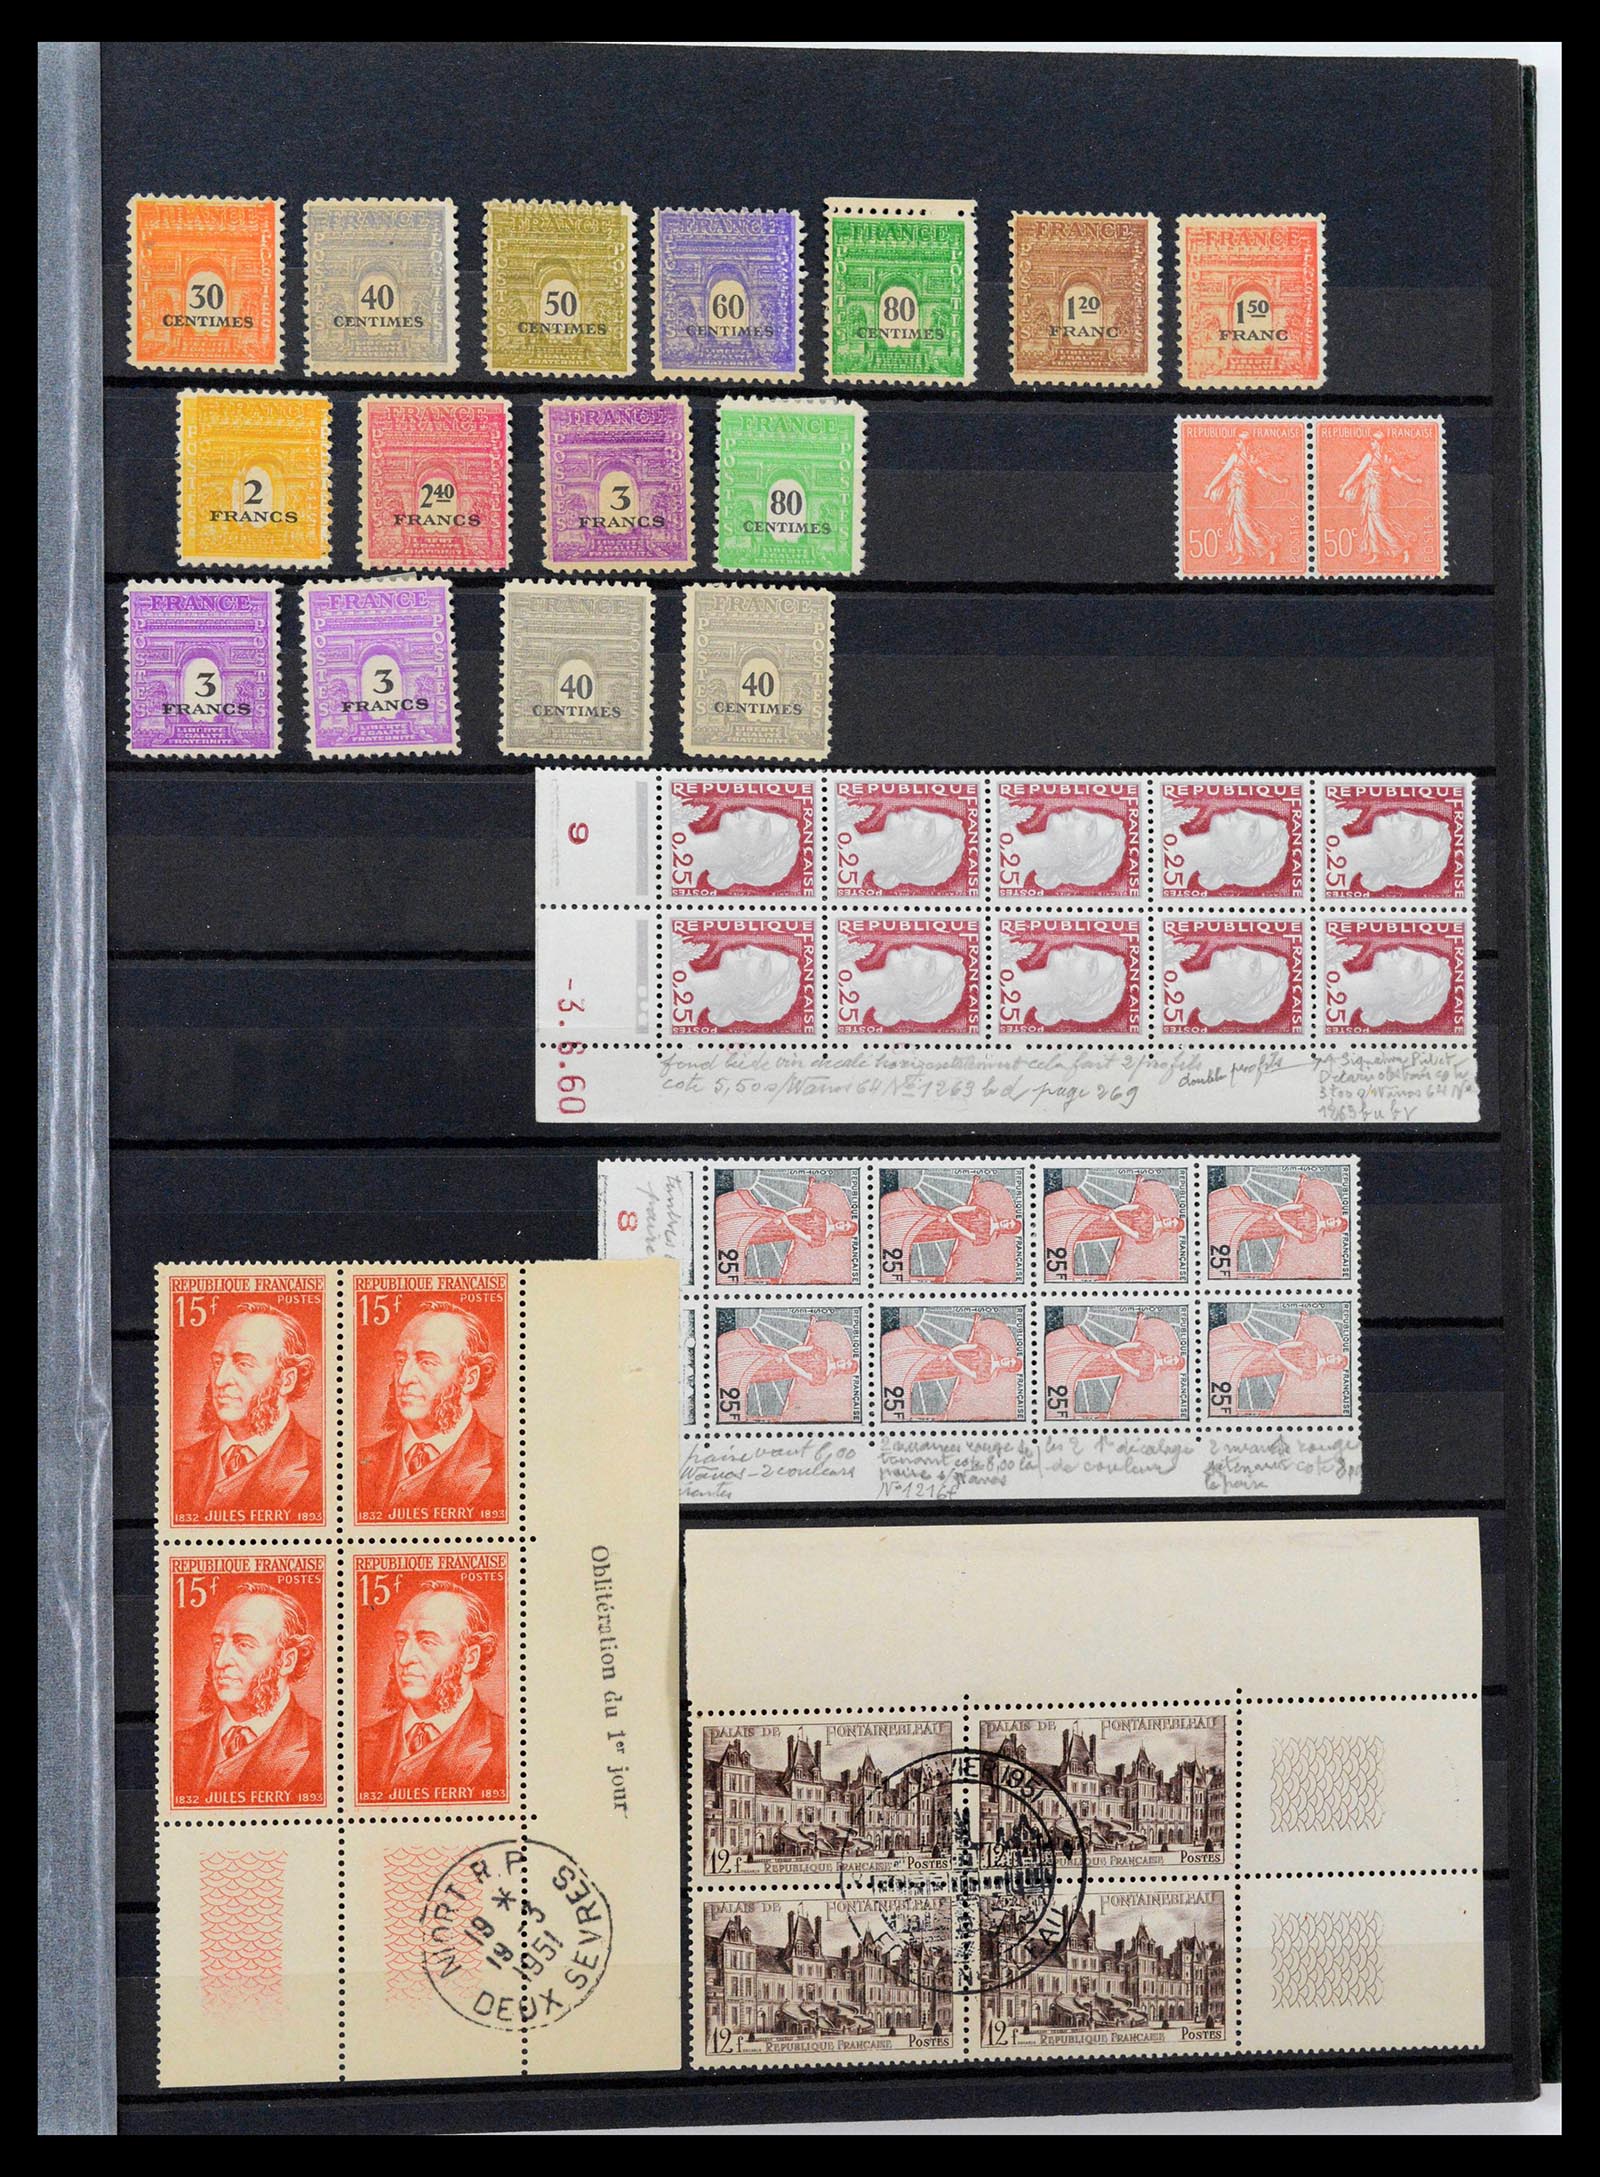 39423 0043 - Stamp collection 39423 France varieties 1862-1985.